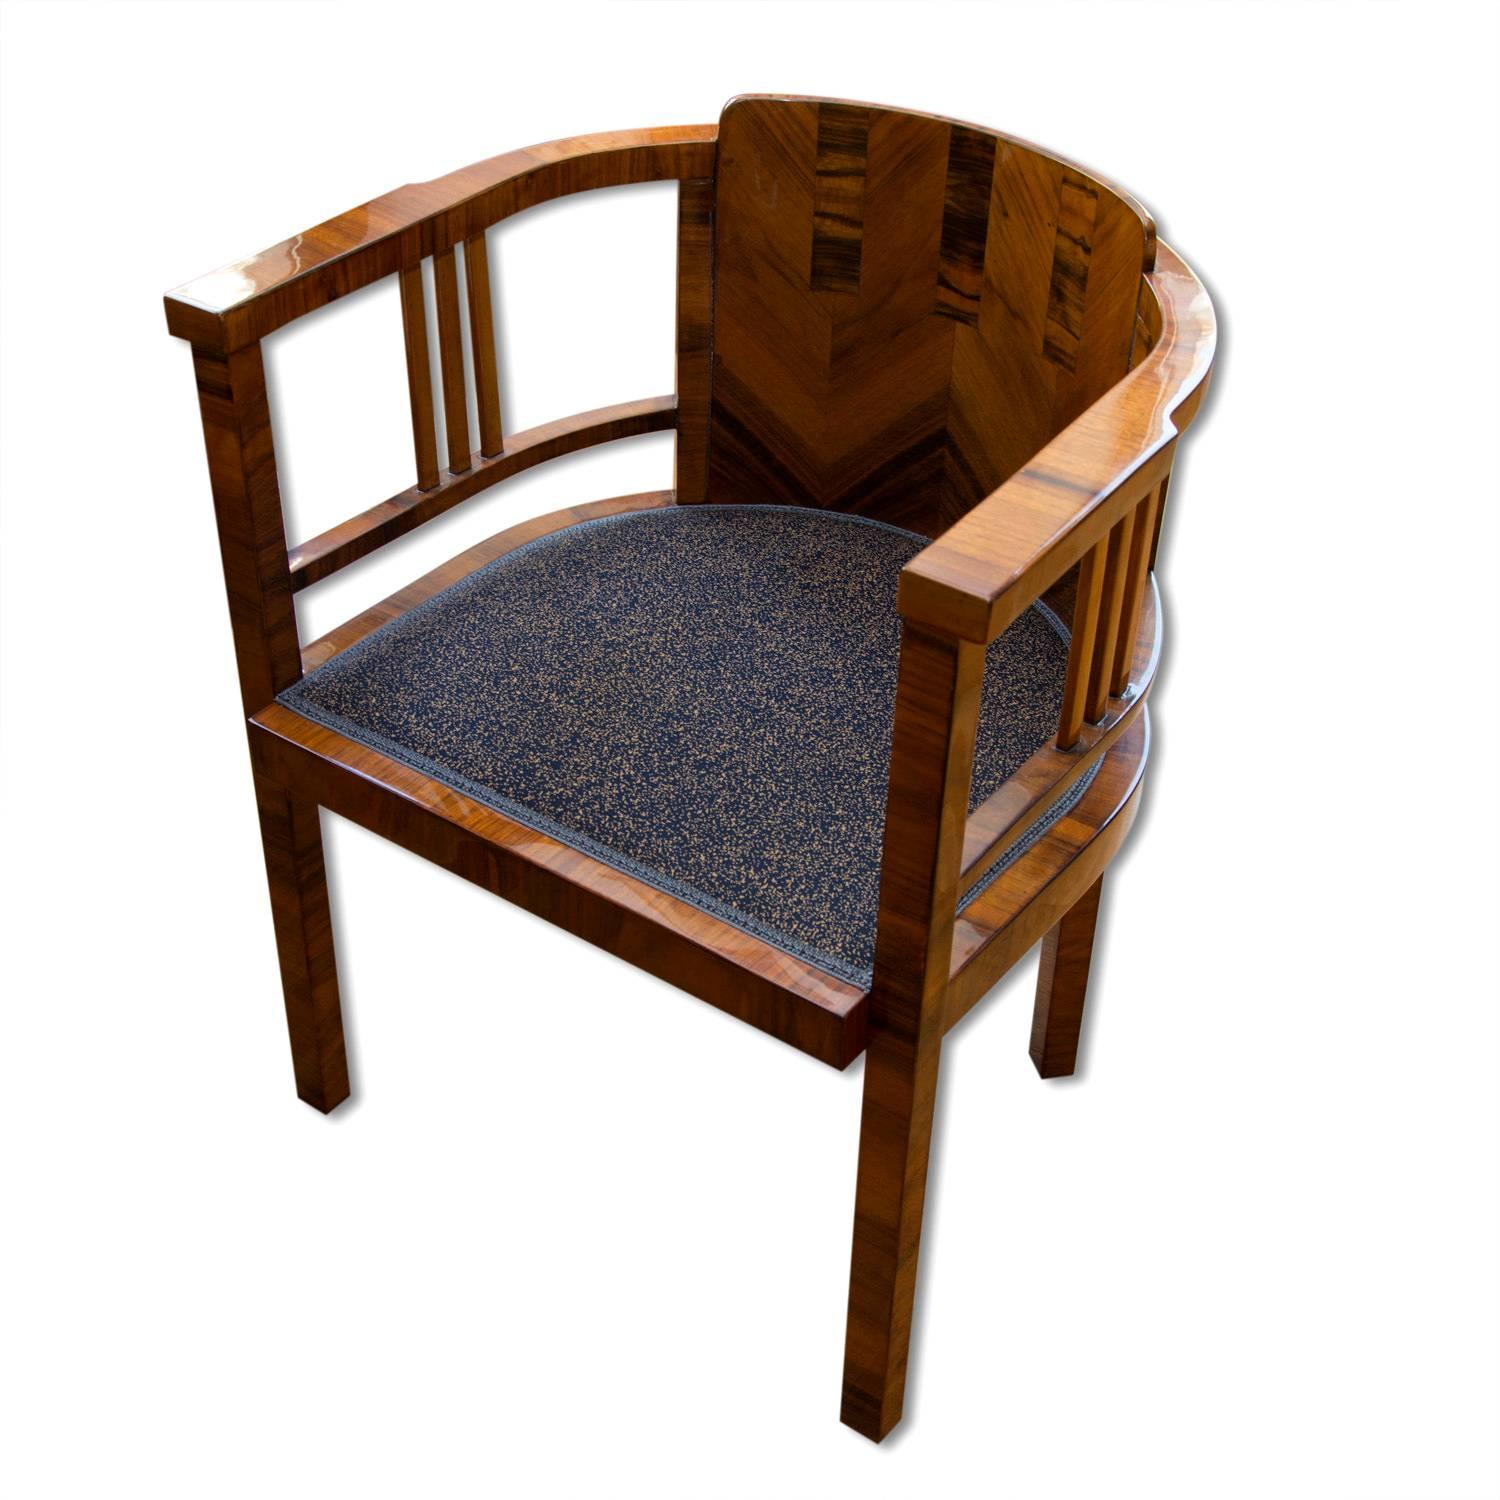 This Art Deco desk chair was made in Bohemia in the 1930s. It´s a part of the writing desk. Comes from an apartment in the center of Prague where it was part of the equipment from the 1930s to the present. The chair features a walnut veneer, new